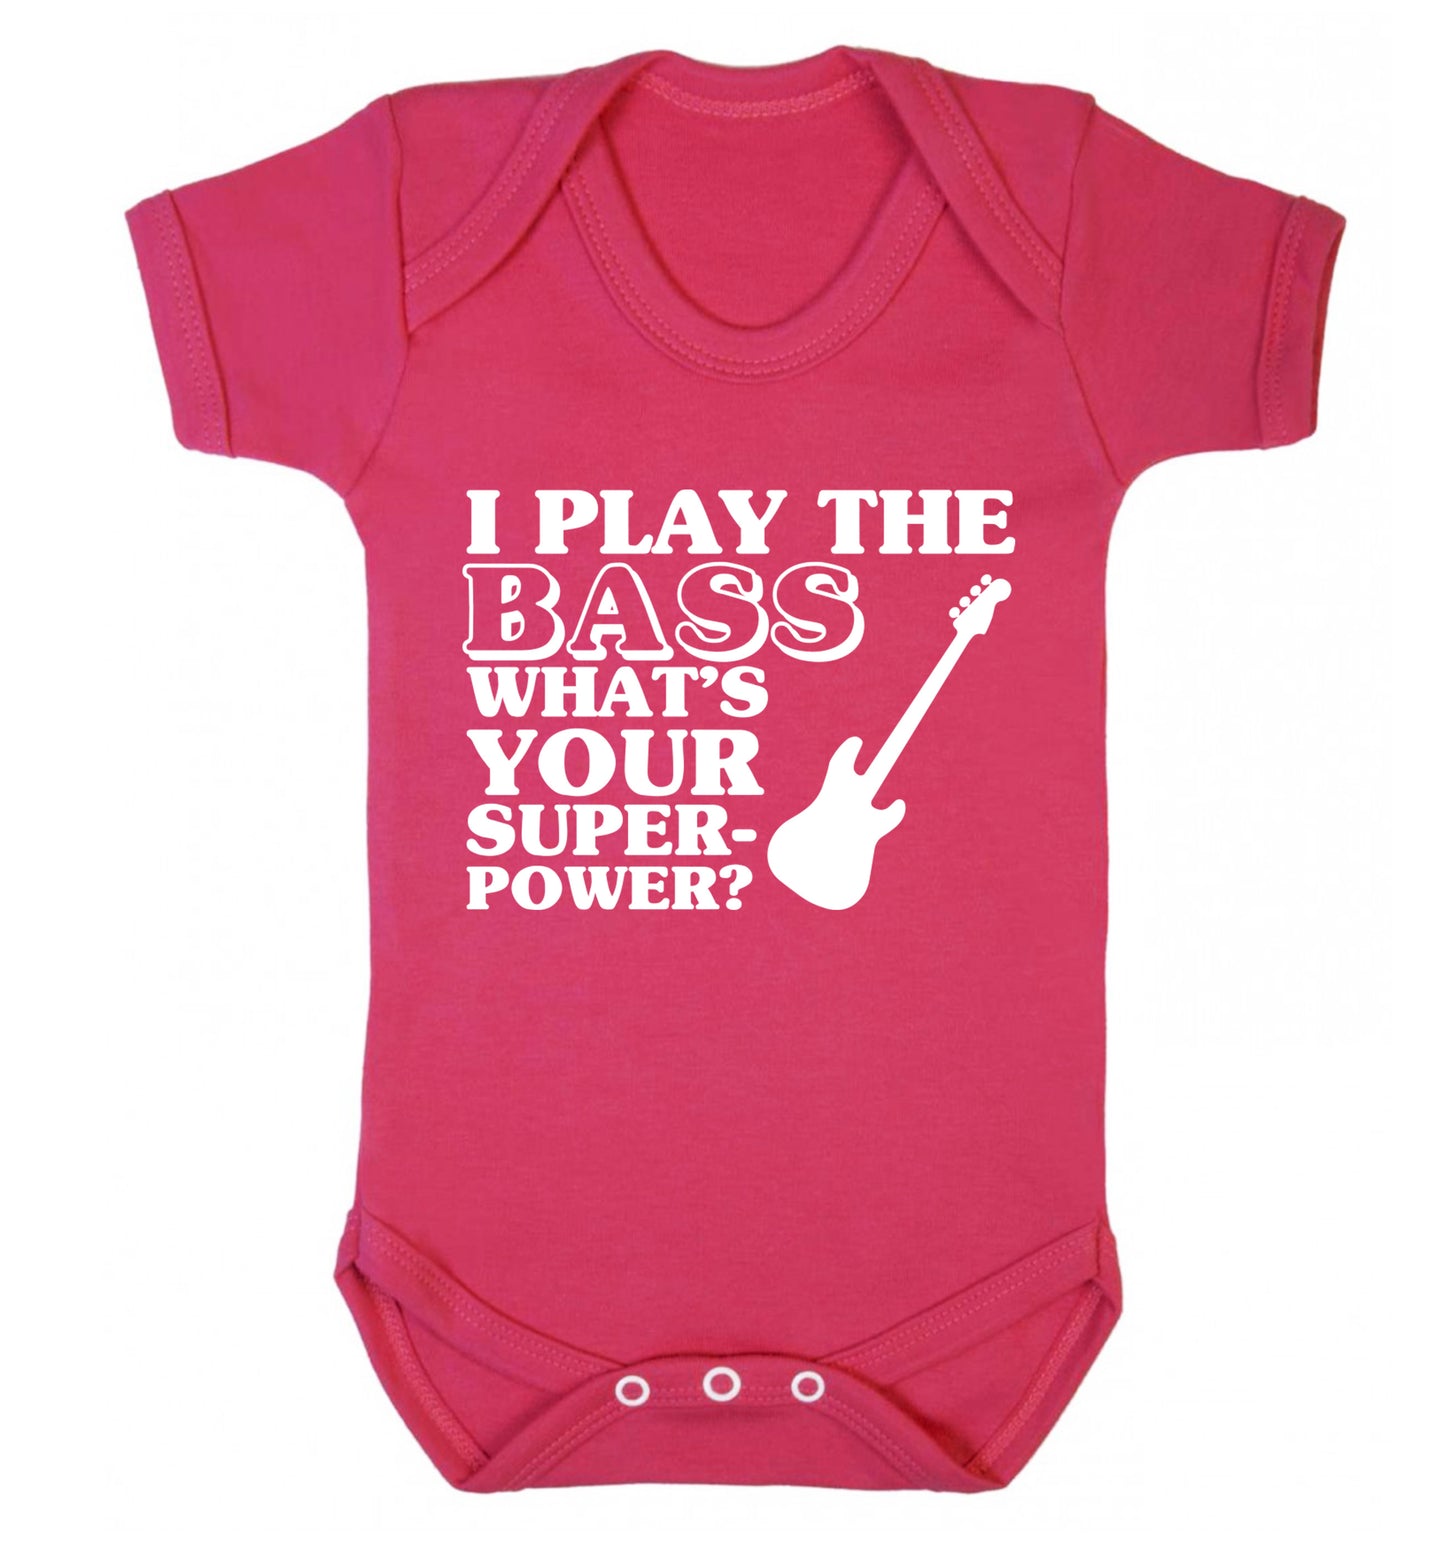 I play the bass what's your superpower? Baby Vest dark pink 18-24 months